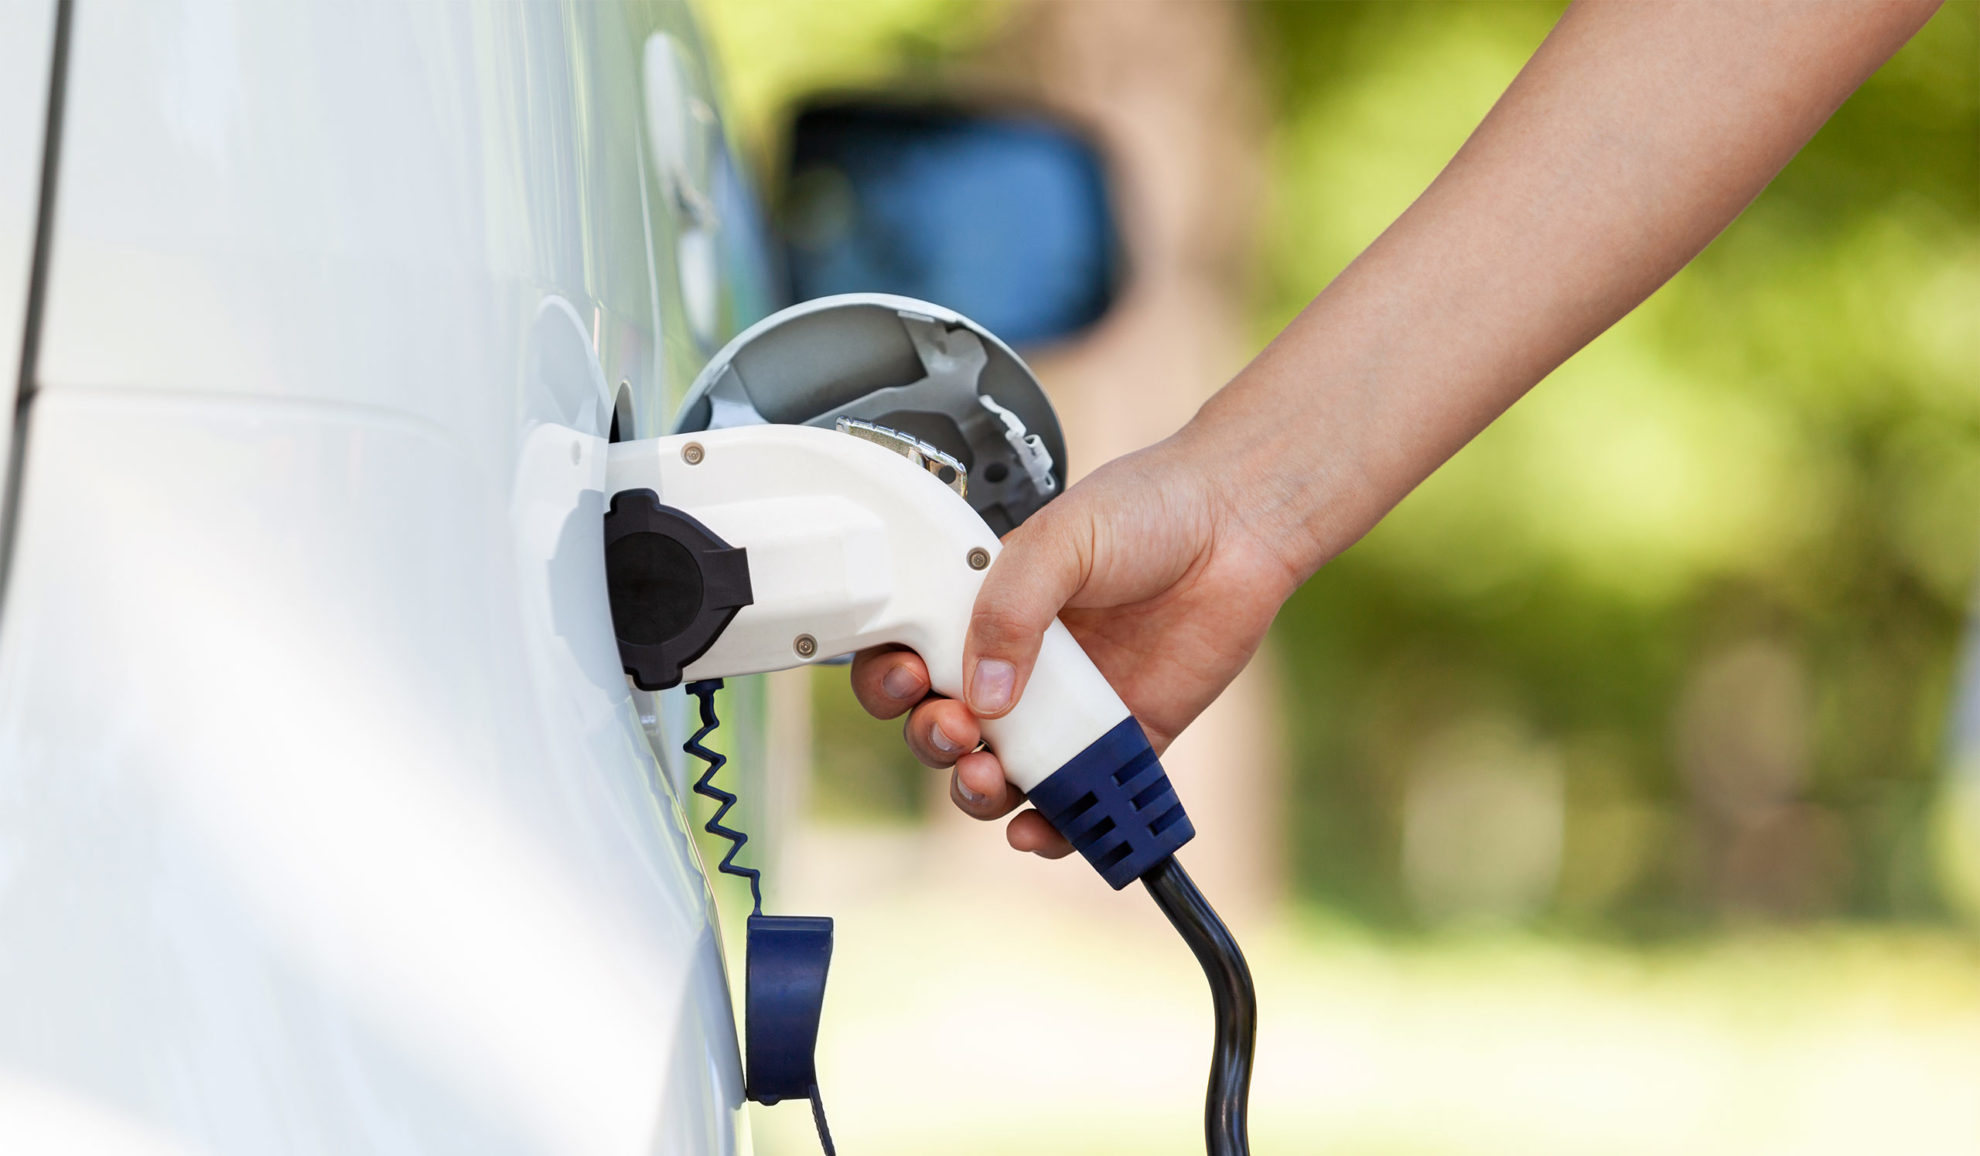 woman-hand-close-up-installing-ev-charger-to-electric-car-close-up-at-exteriors-auburn-ca